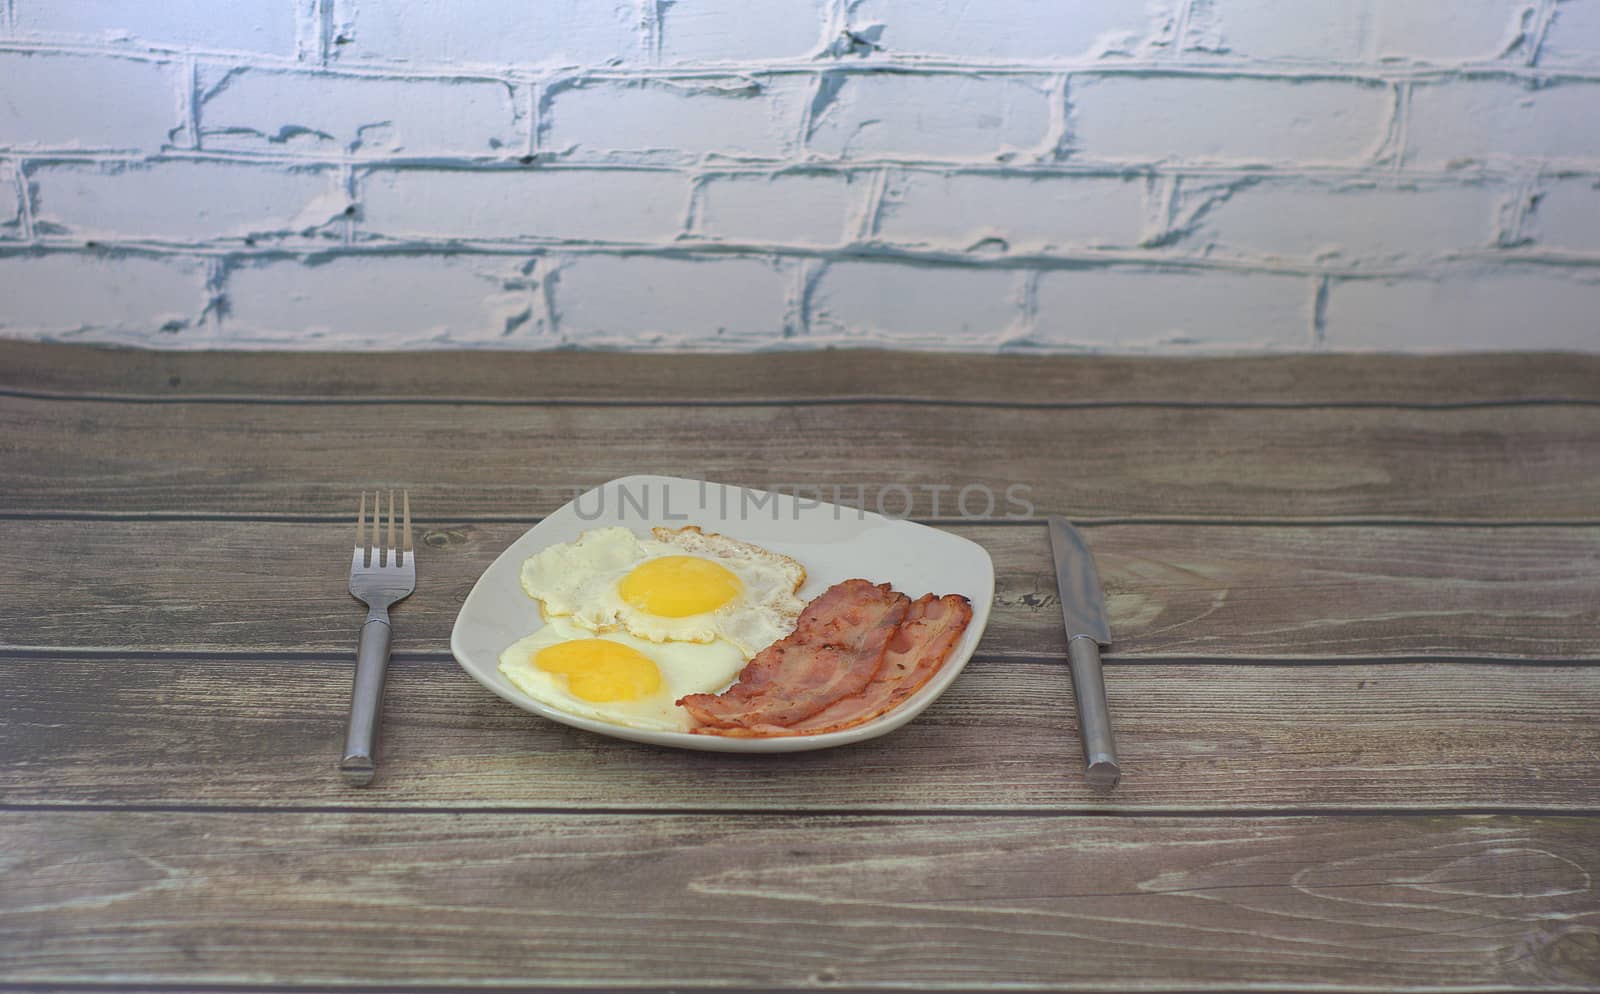 Breakfast, on a plate are two fried eggs and two slices of bacon in the form of an emoticon, next to a fork and knife.